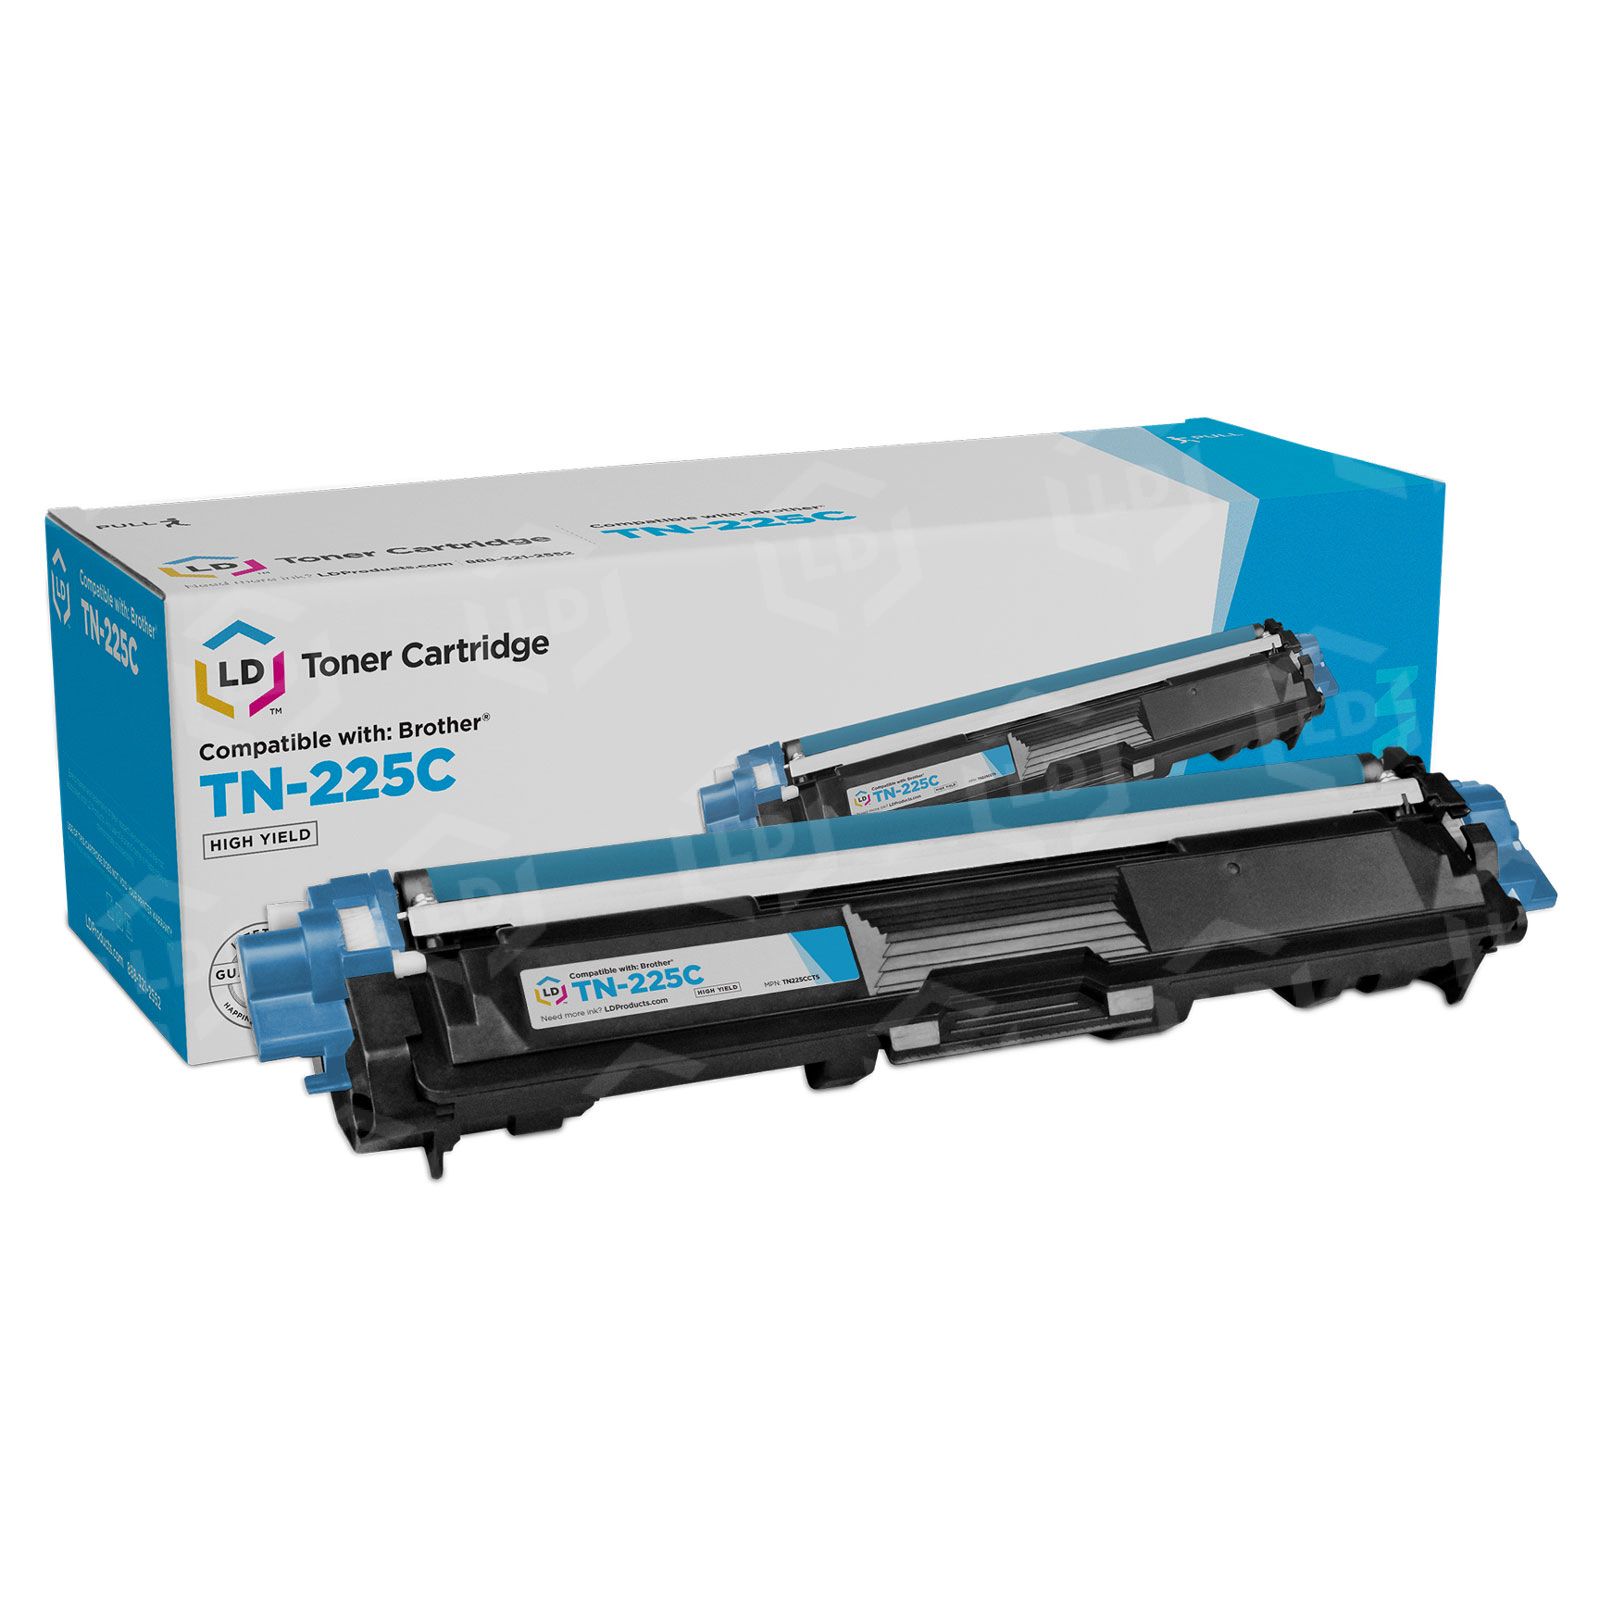 Brother MFC-9330CDW Toner - Low Prices on Best-Selling Compatible